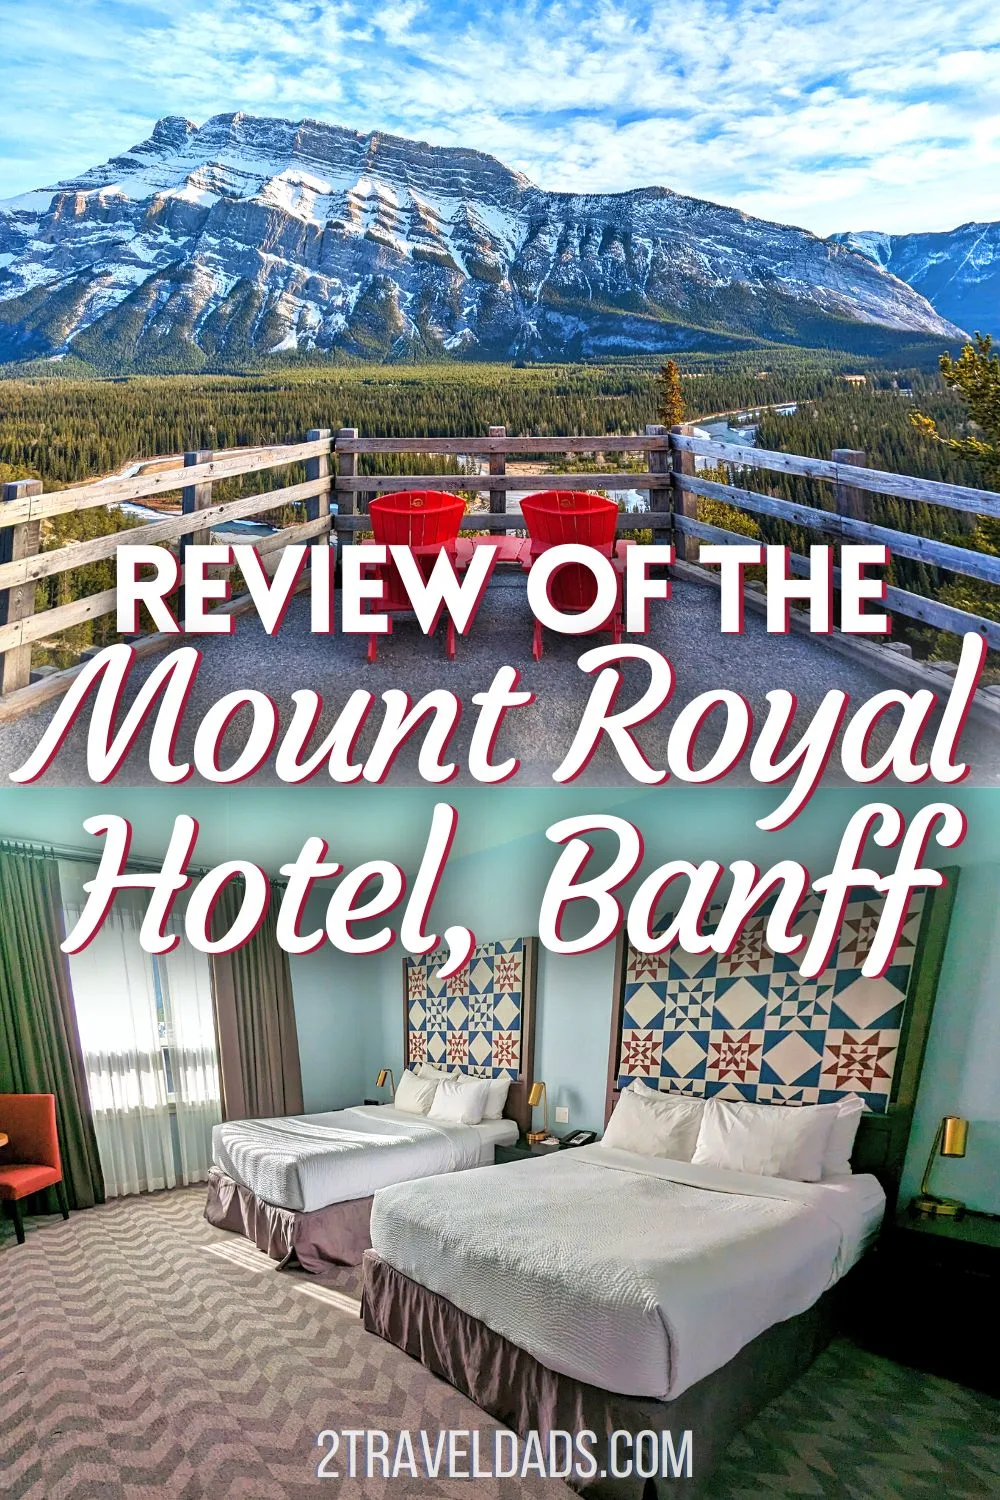 If you need a nice place to stay in downtown Banff, the Mount Royal Hotel is THE place. With rooftop hot tubs, a lounge for guests and spacious rooms it's a fantastic home base for exploring Banff National Park.